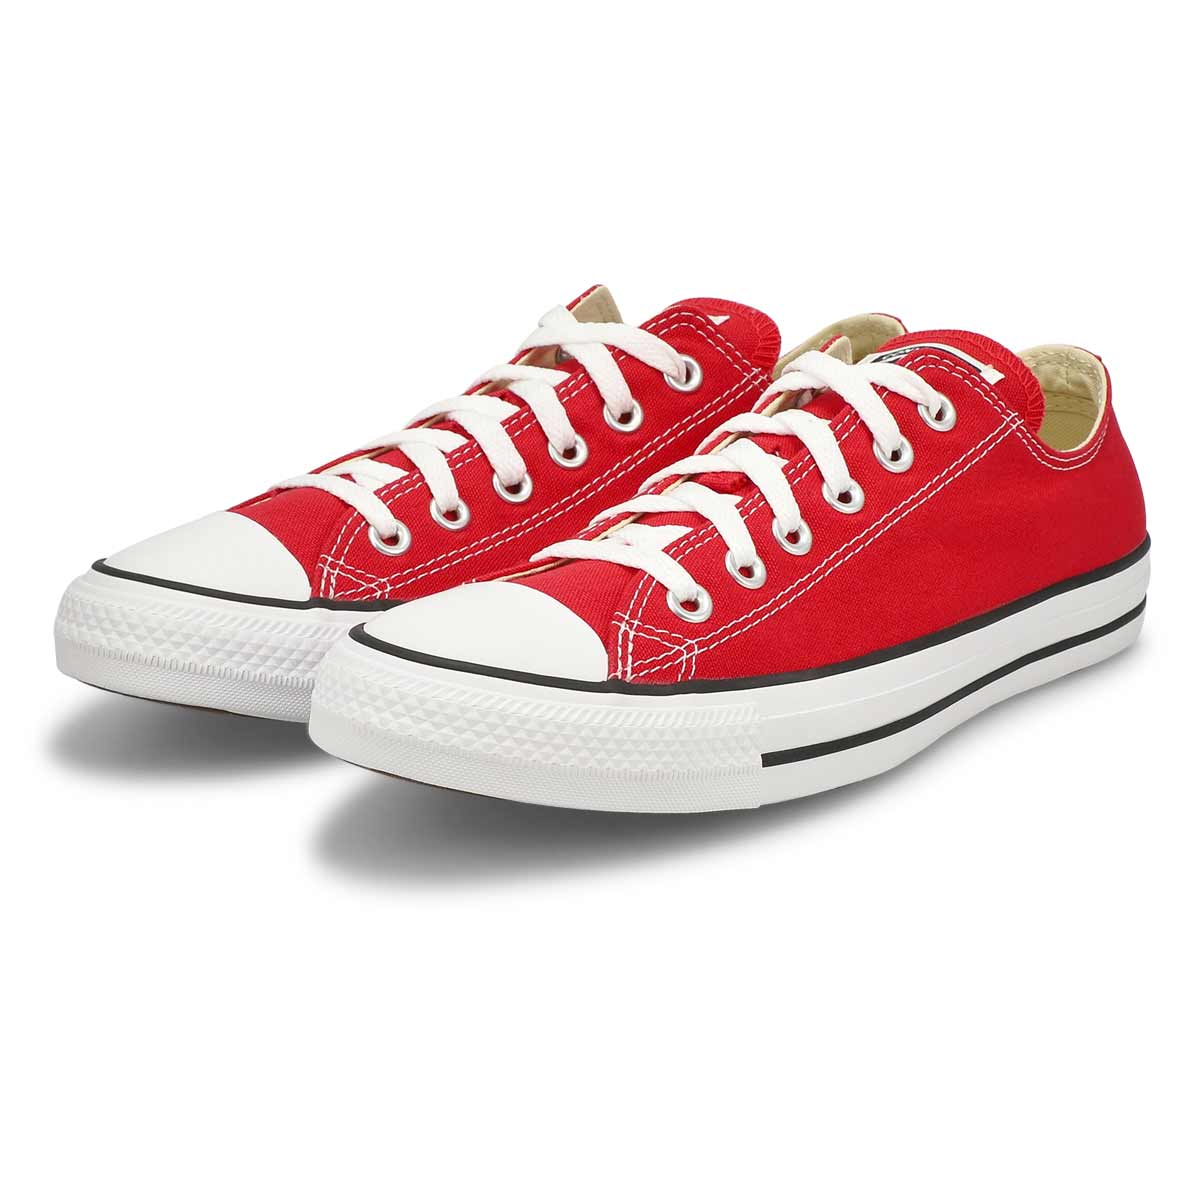 Men's Chuck Taylor All Star Core Sneaker - Red